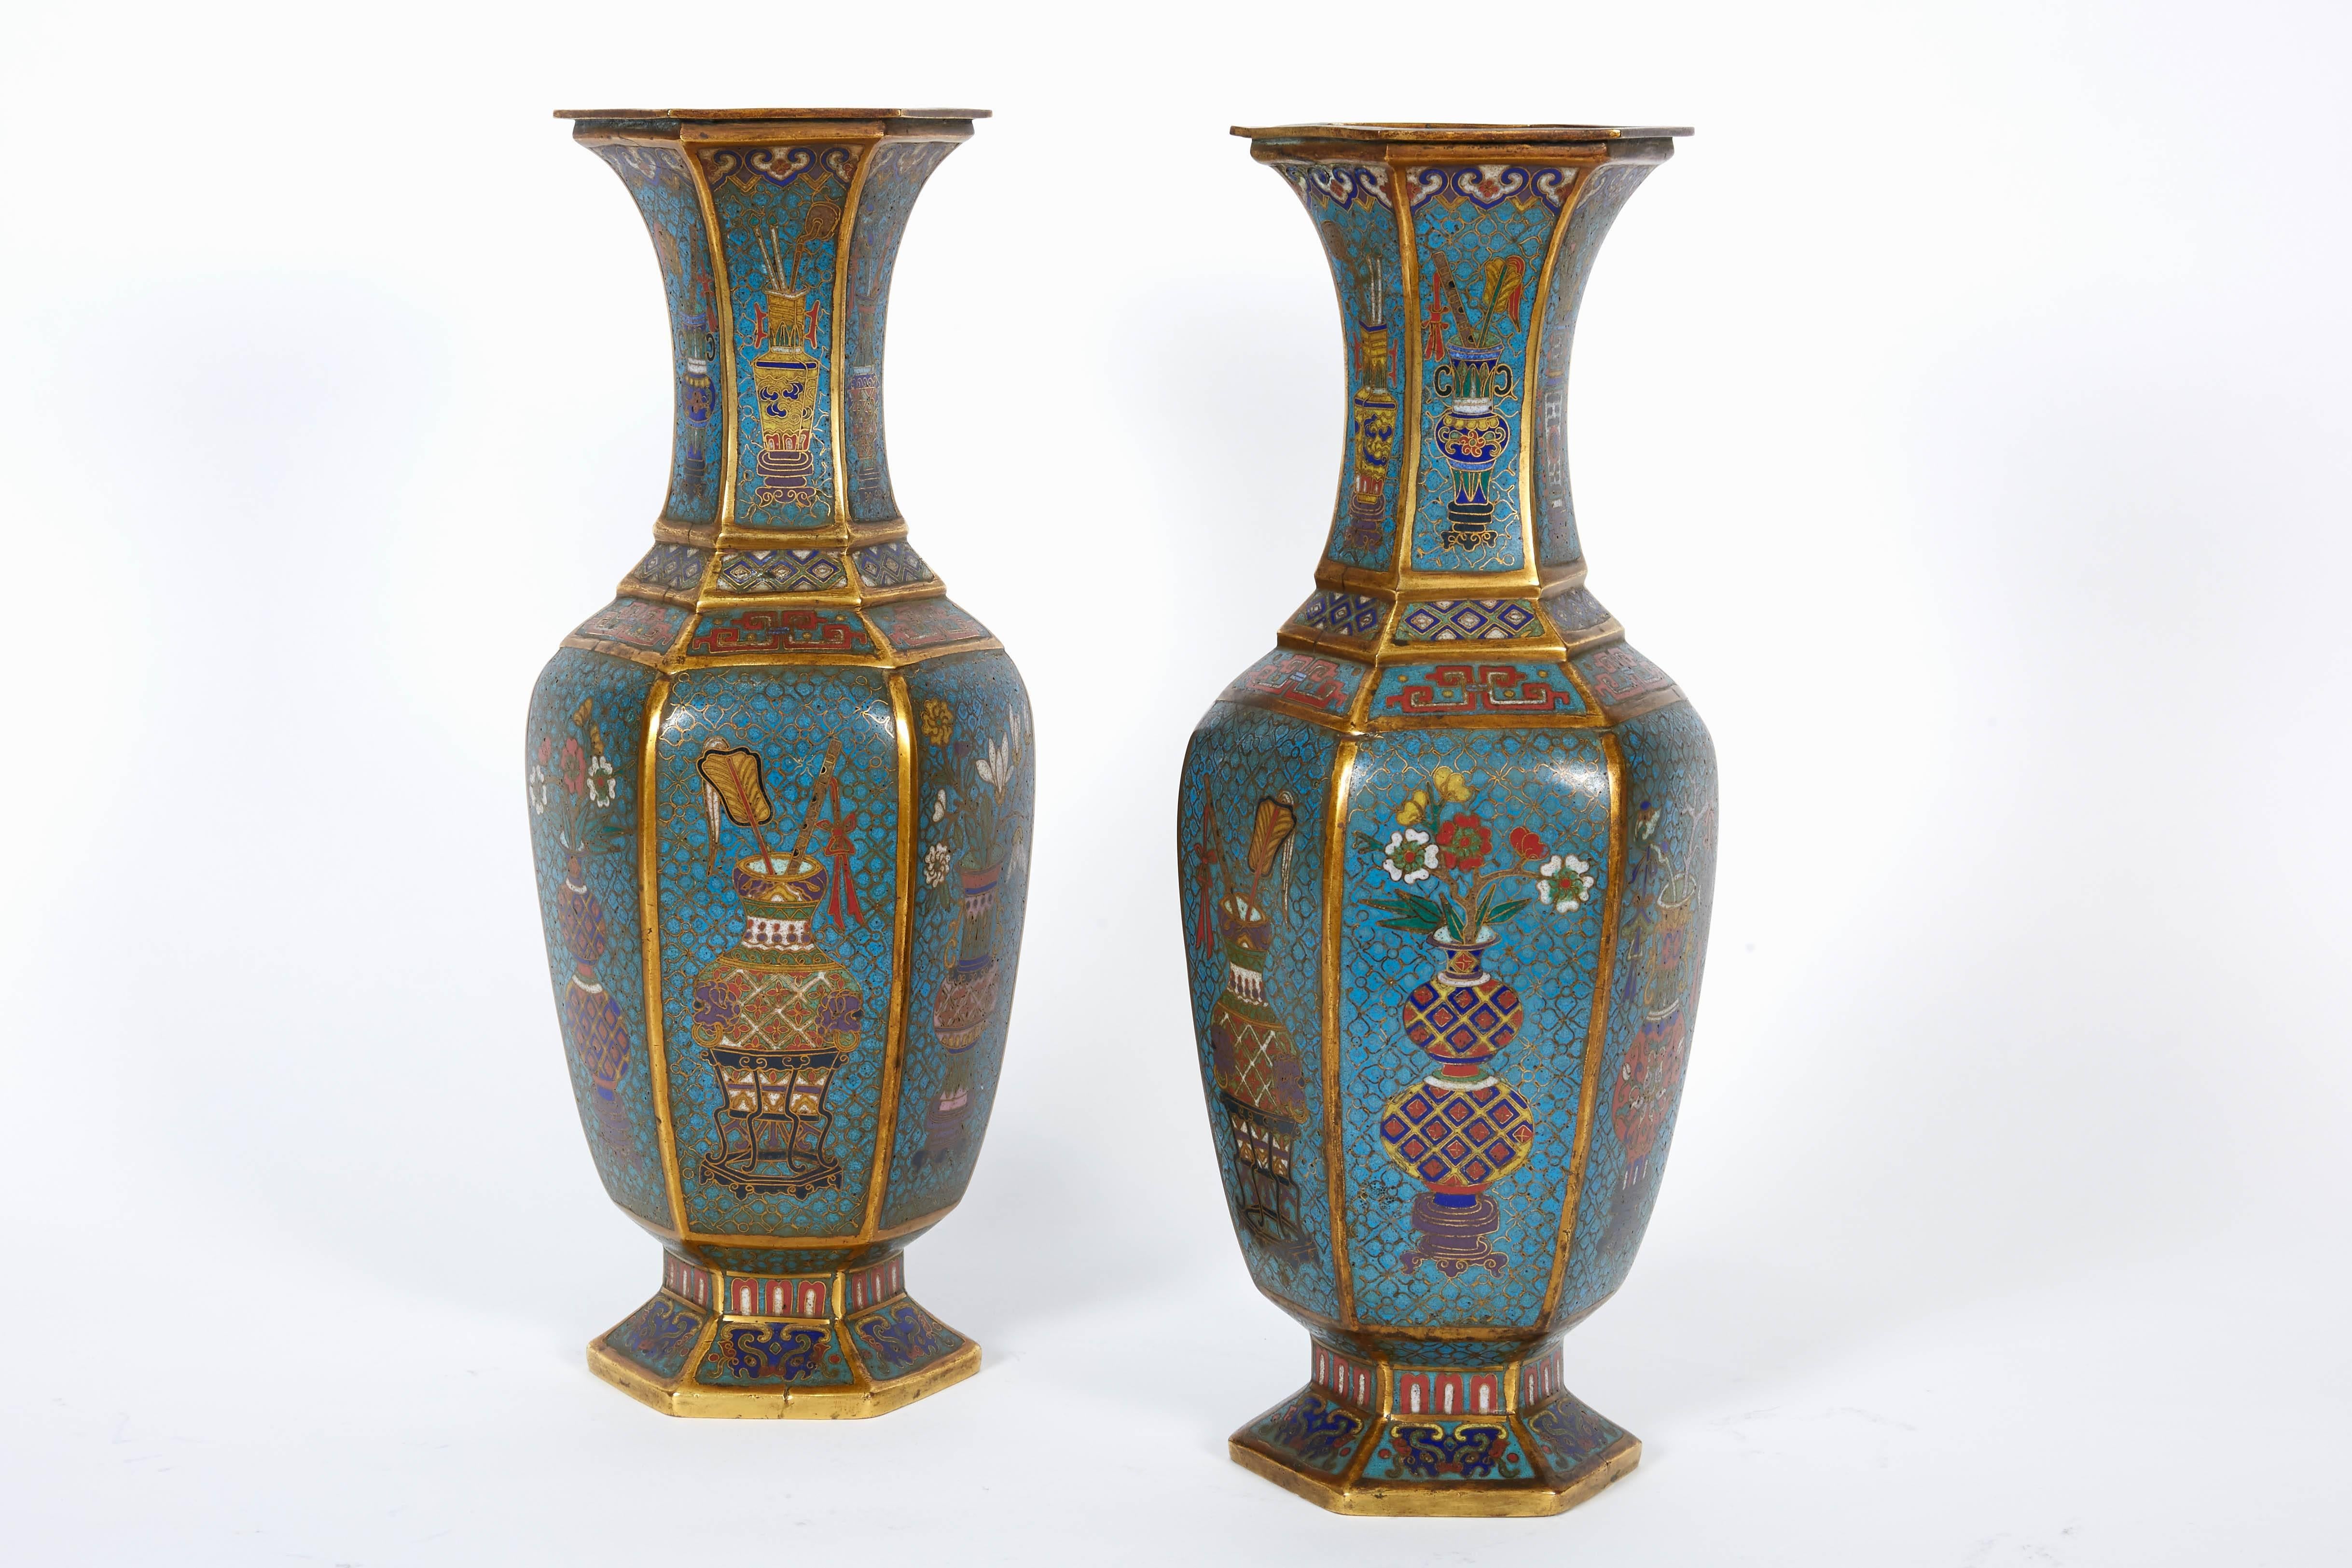 A pair of Chinese cloisonne enamel vases, Qing dynasty, Qianlong period.

Of hexagonal baluster form, decorated with vases and urns with flowers.

Very good condition. 

Measure: 12.5